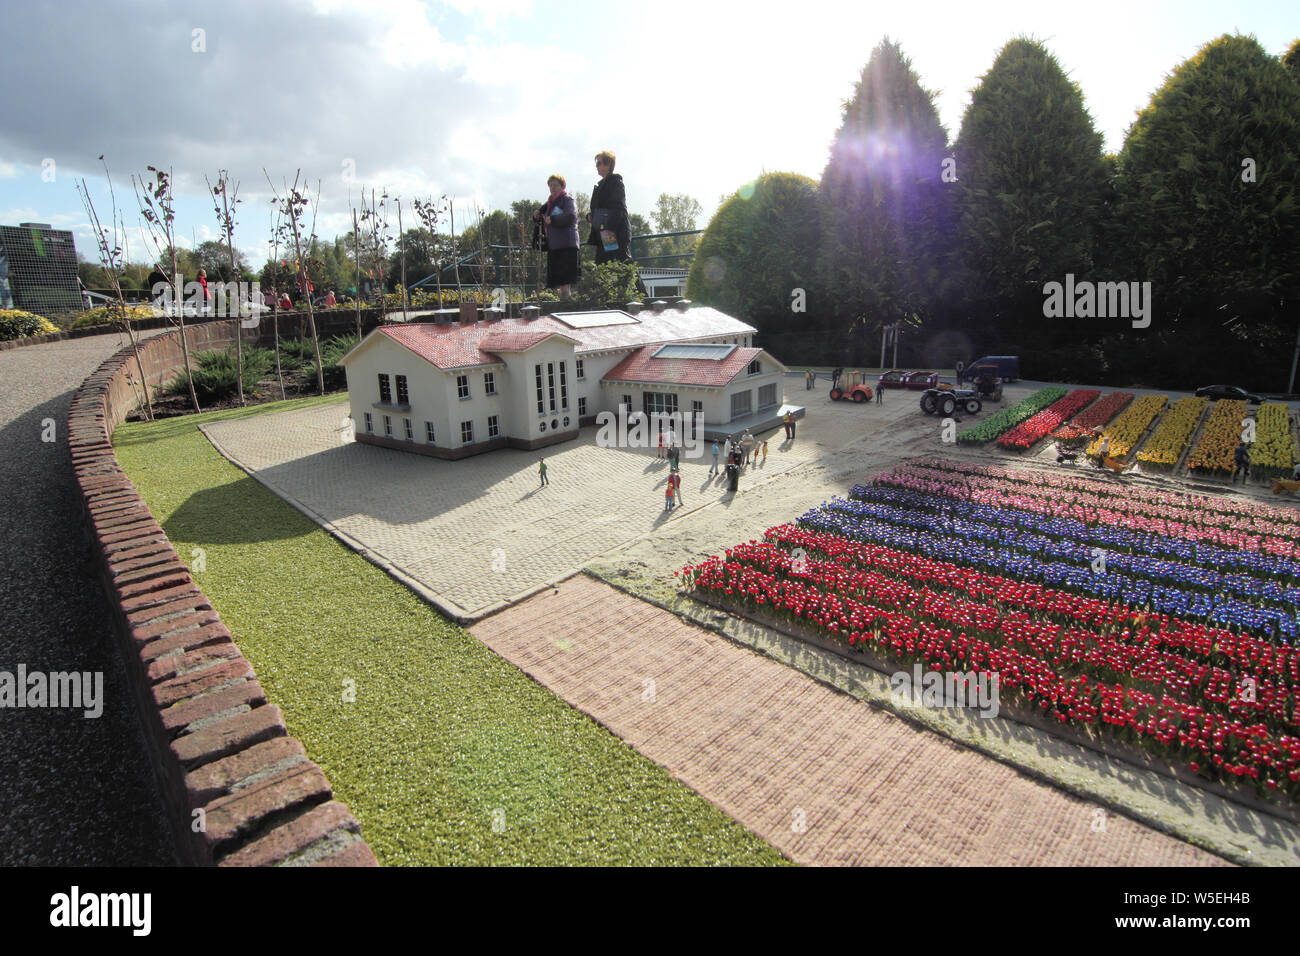 Madurodam park is Holland’s smallest city. It provides a perfect combination of an amusement park, historical heritage and world-class nature. Stock Photo